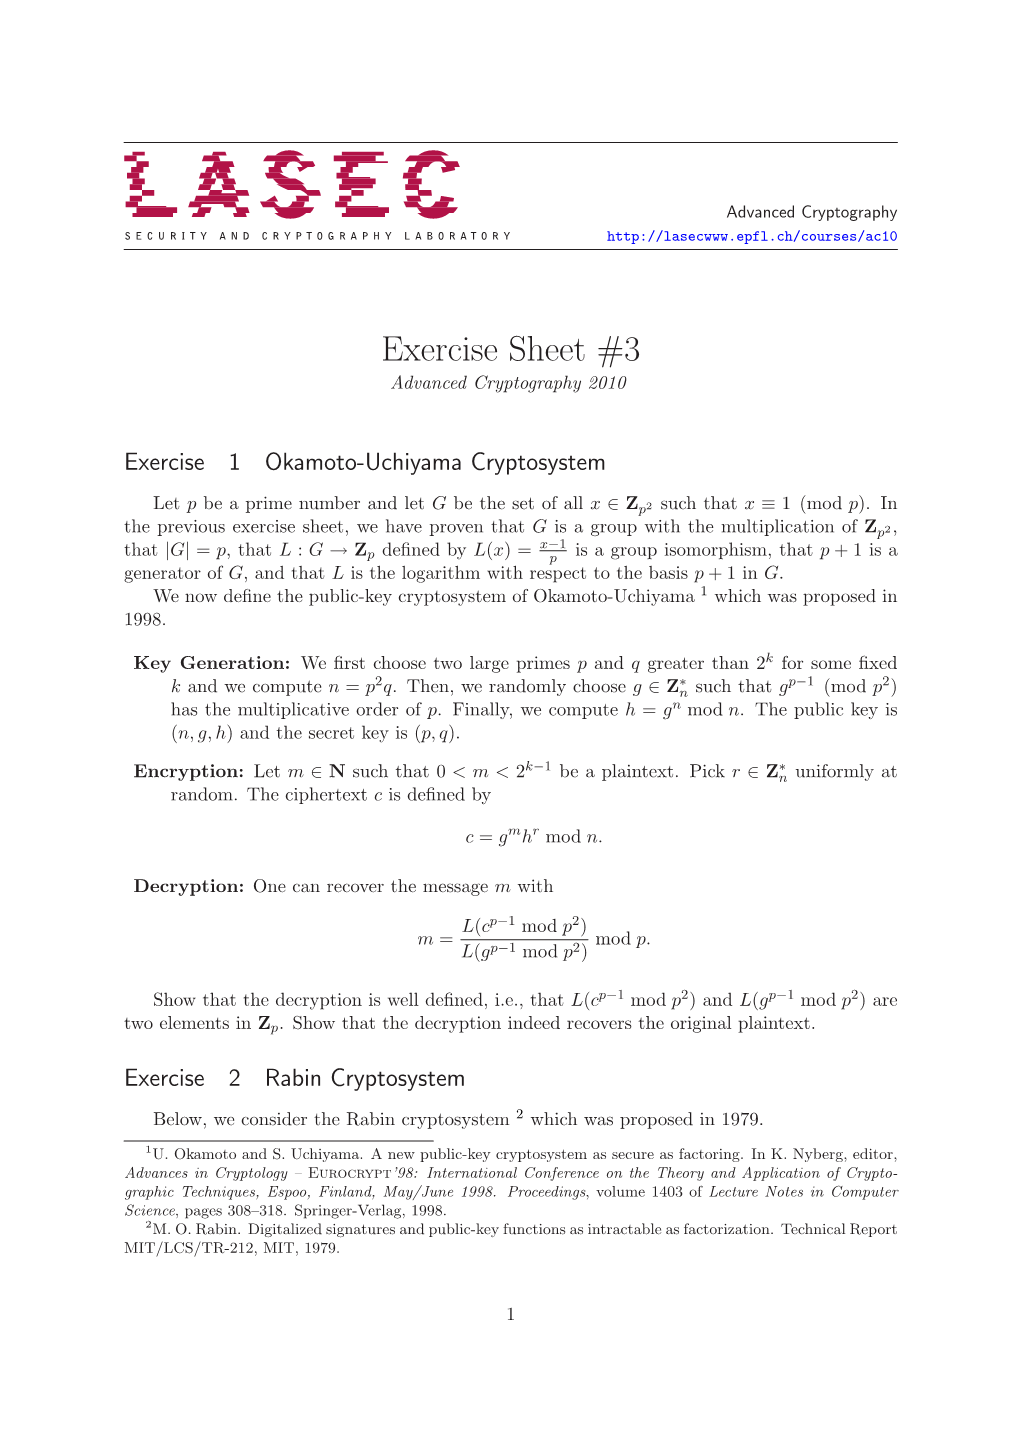 Exercise Sheet #3 Advanced Cryptography 2010